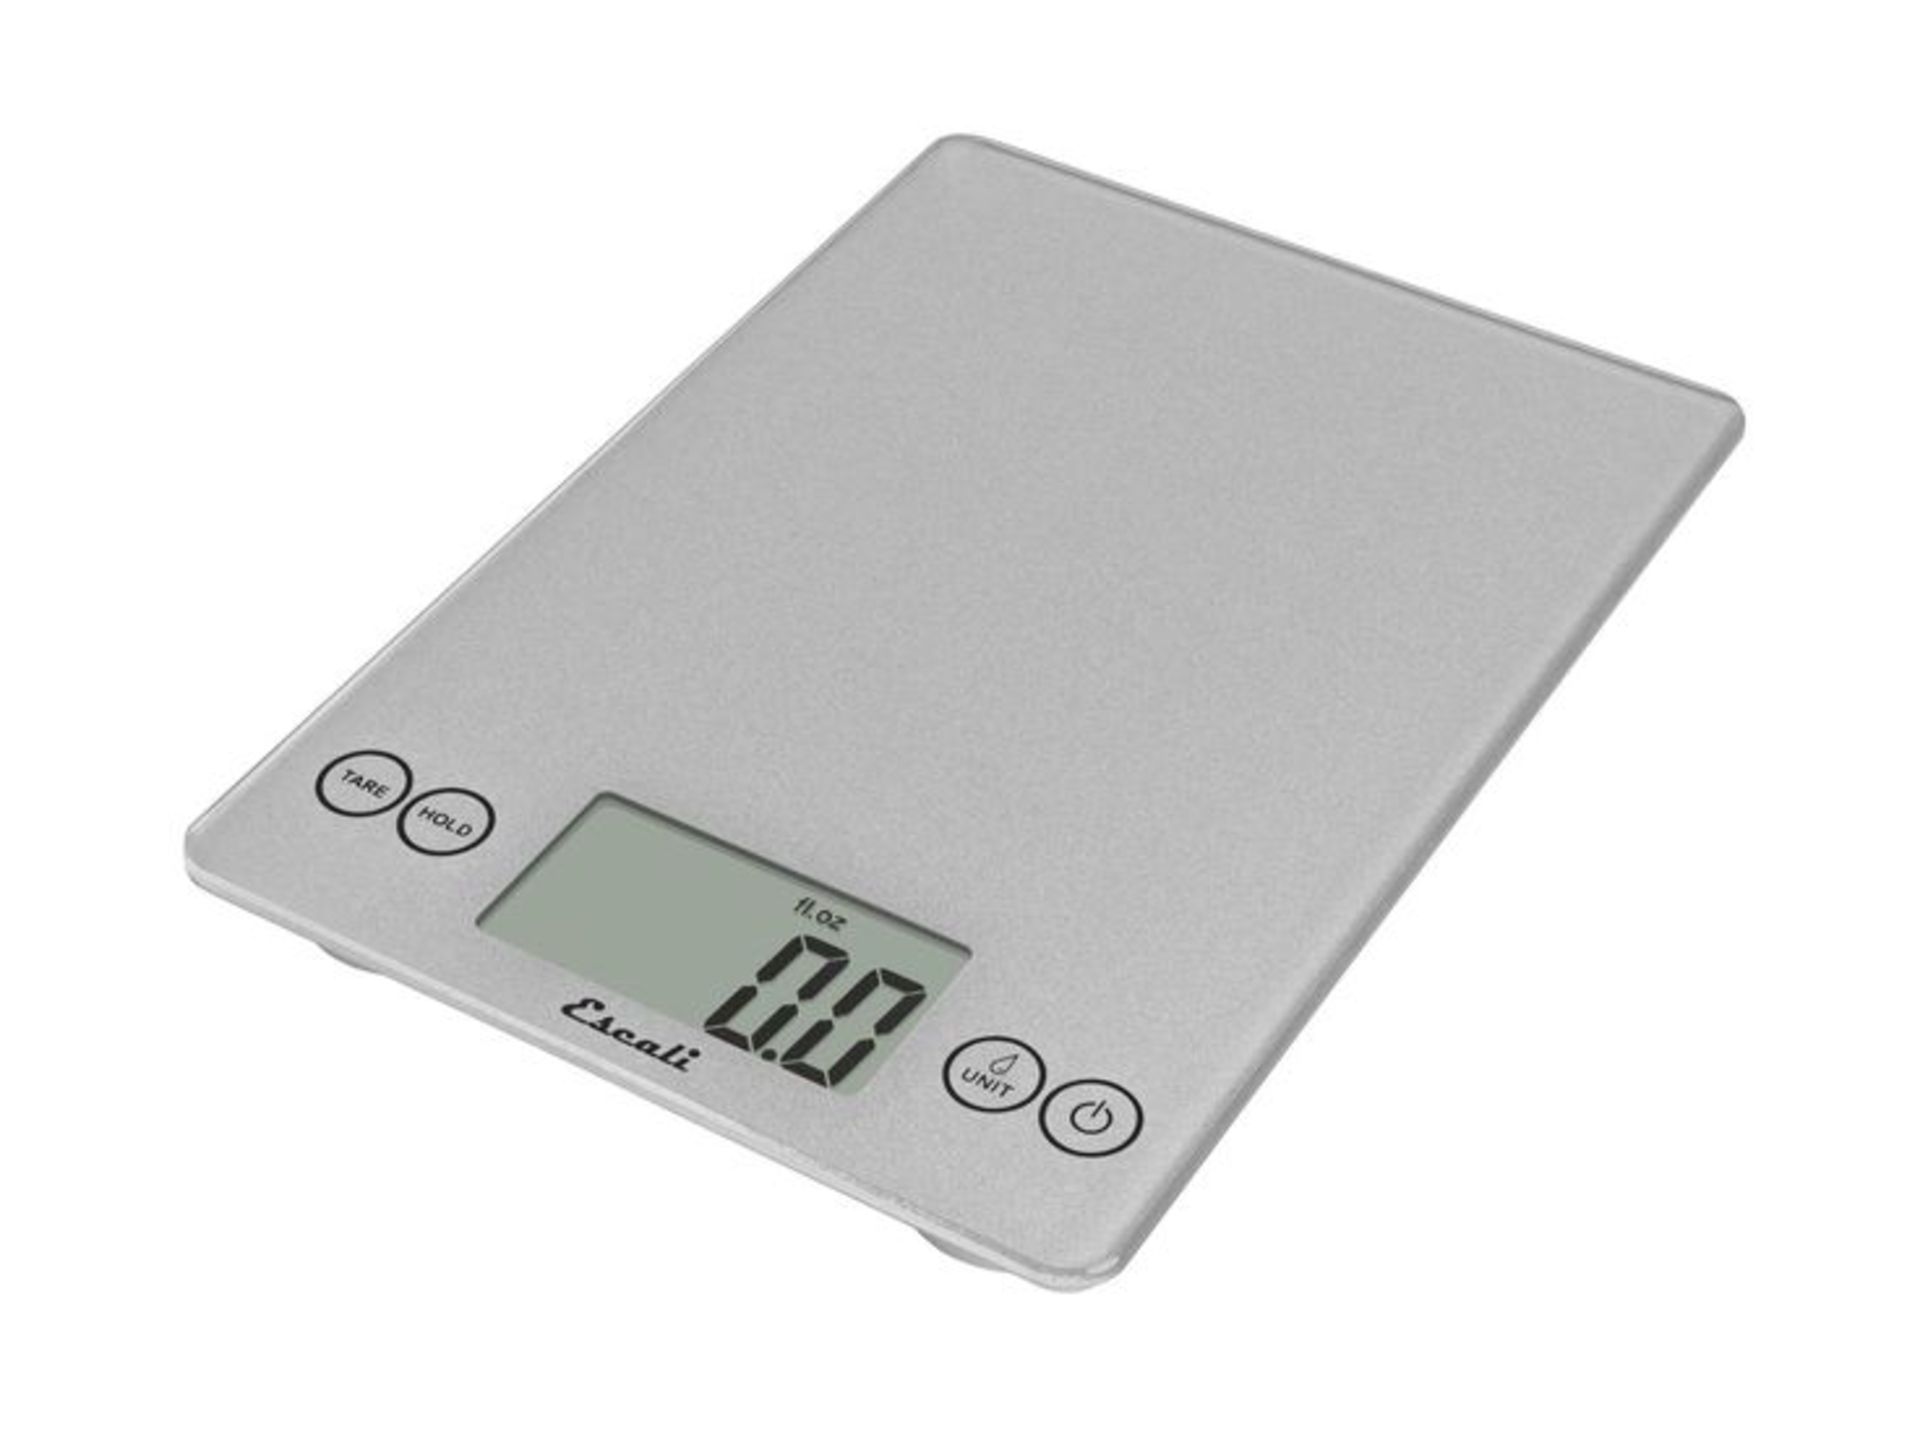 V Brand New Digital Kitchen Scales with Large LCD Display in lbs OZs and Grams (Styles may vary - Bild 3 aus 4